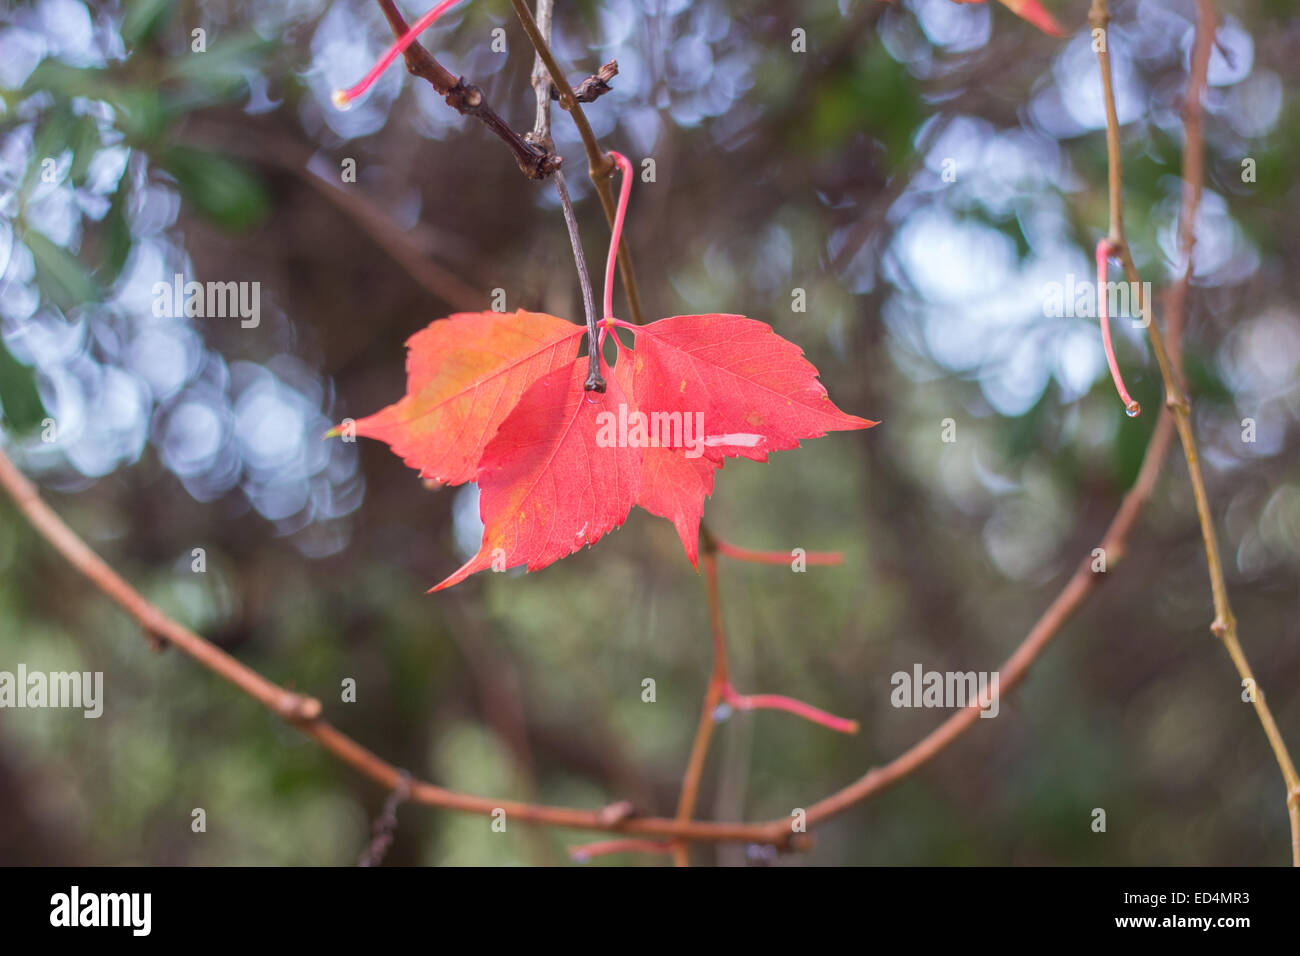 red leaves on tree branch Stock Photo